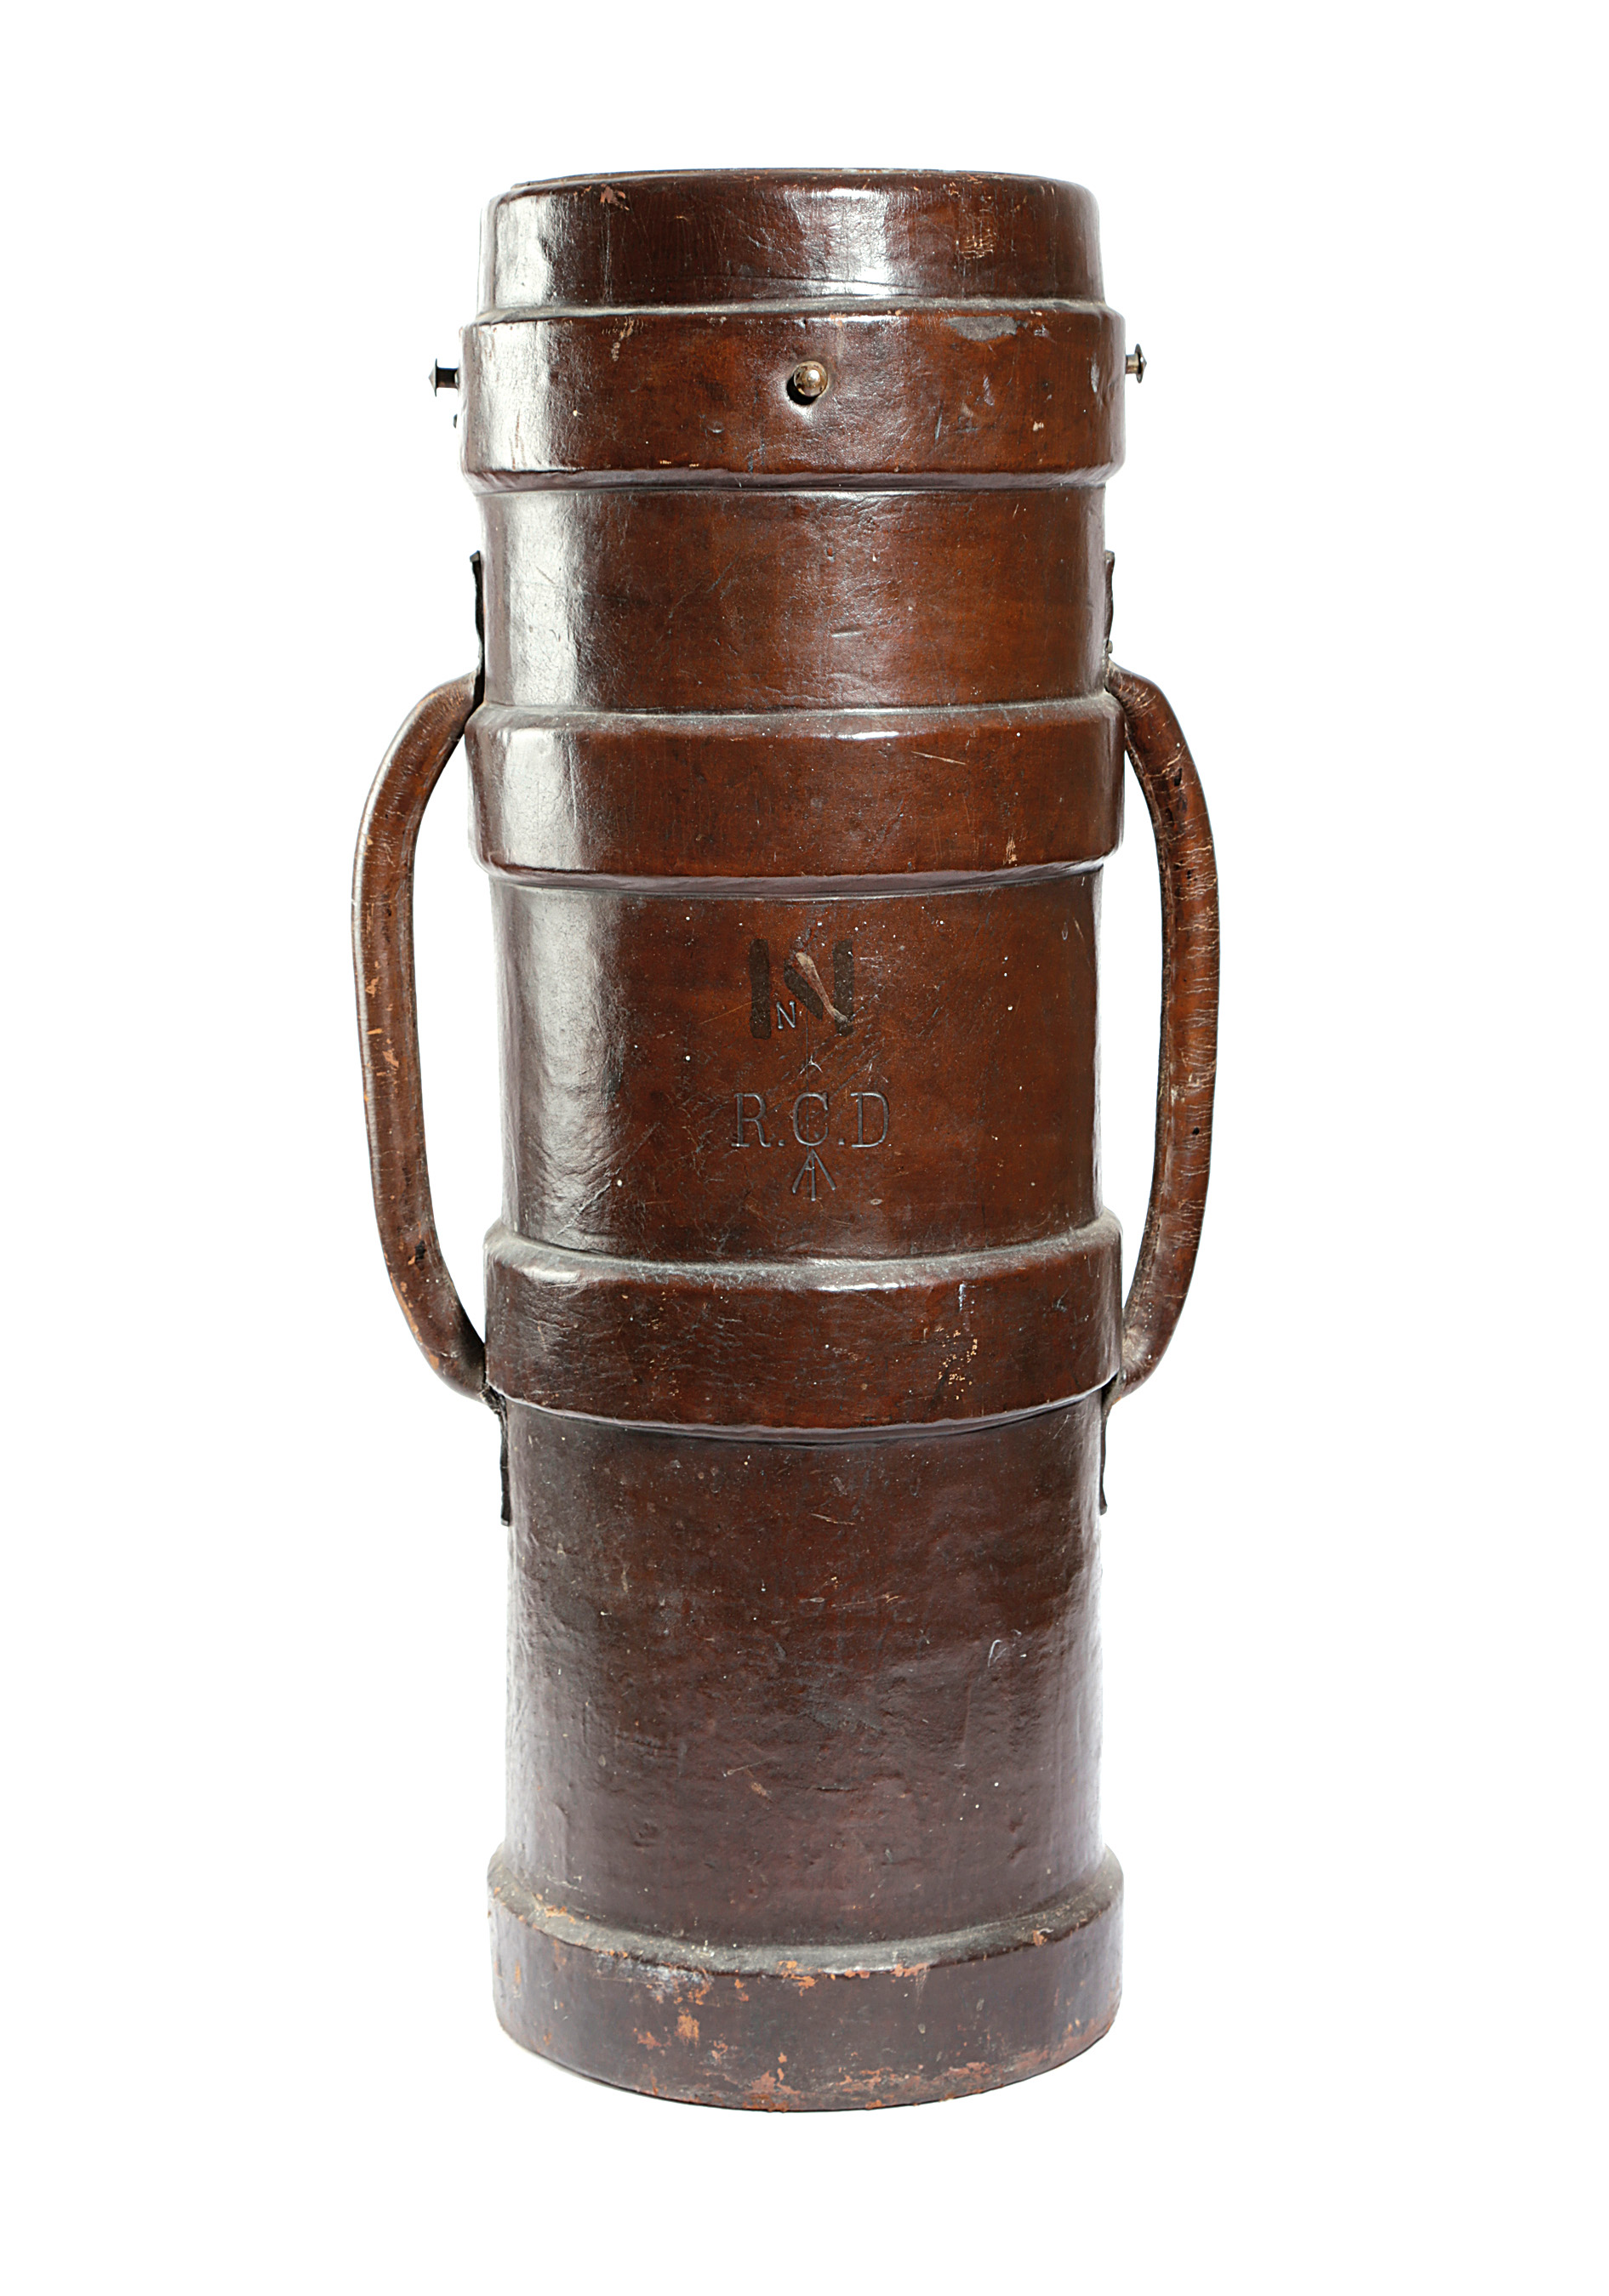 A LEATHER ARTILLERY SHELL STICKSTAND with a pair of lug handles and a metal liner 74.5cm high